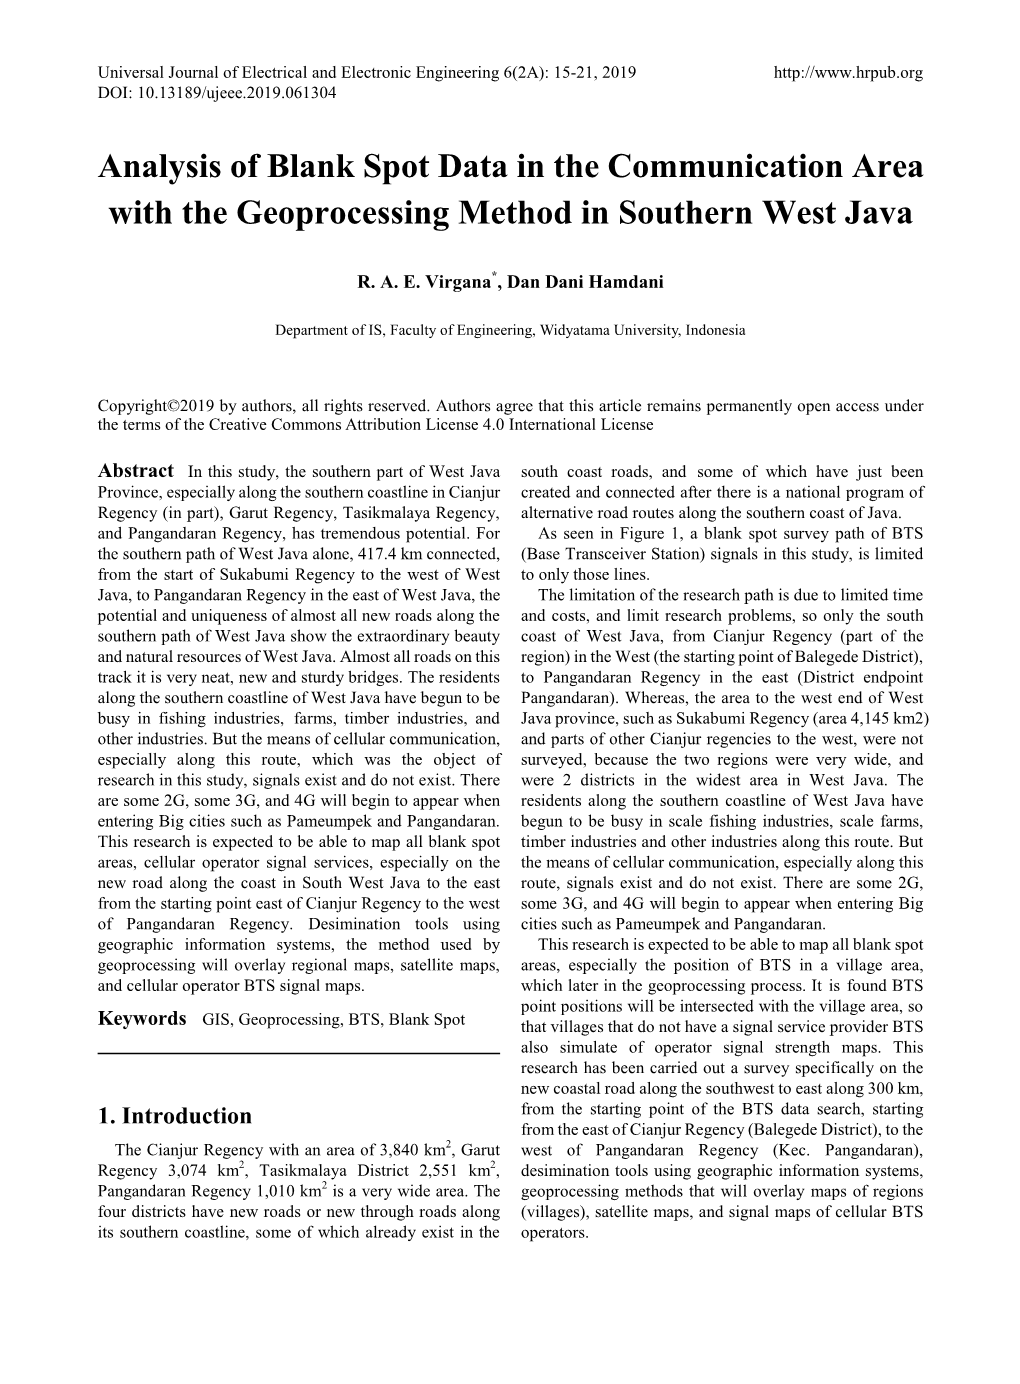 Analysis of Blank Spot Data in the Communication Area with the Geoprocessing Method in Southern West Java